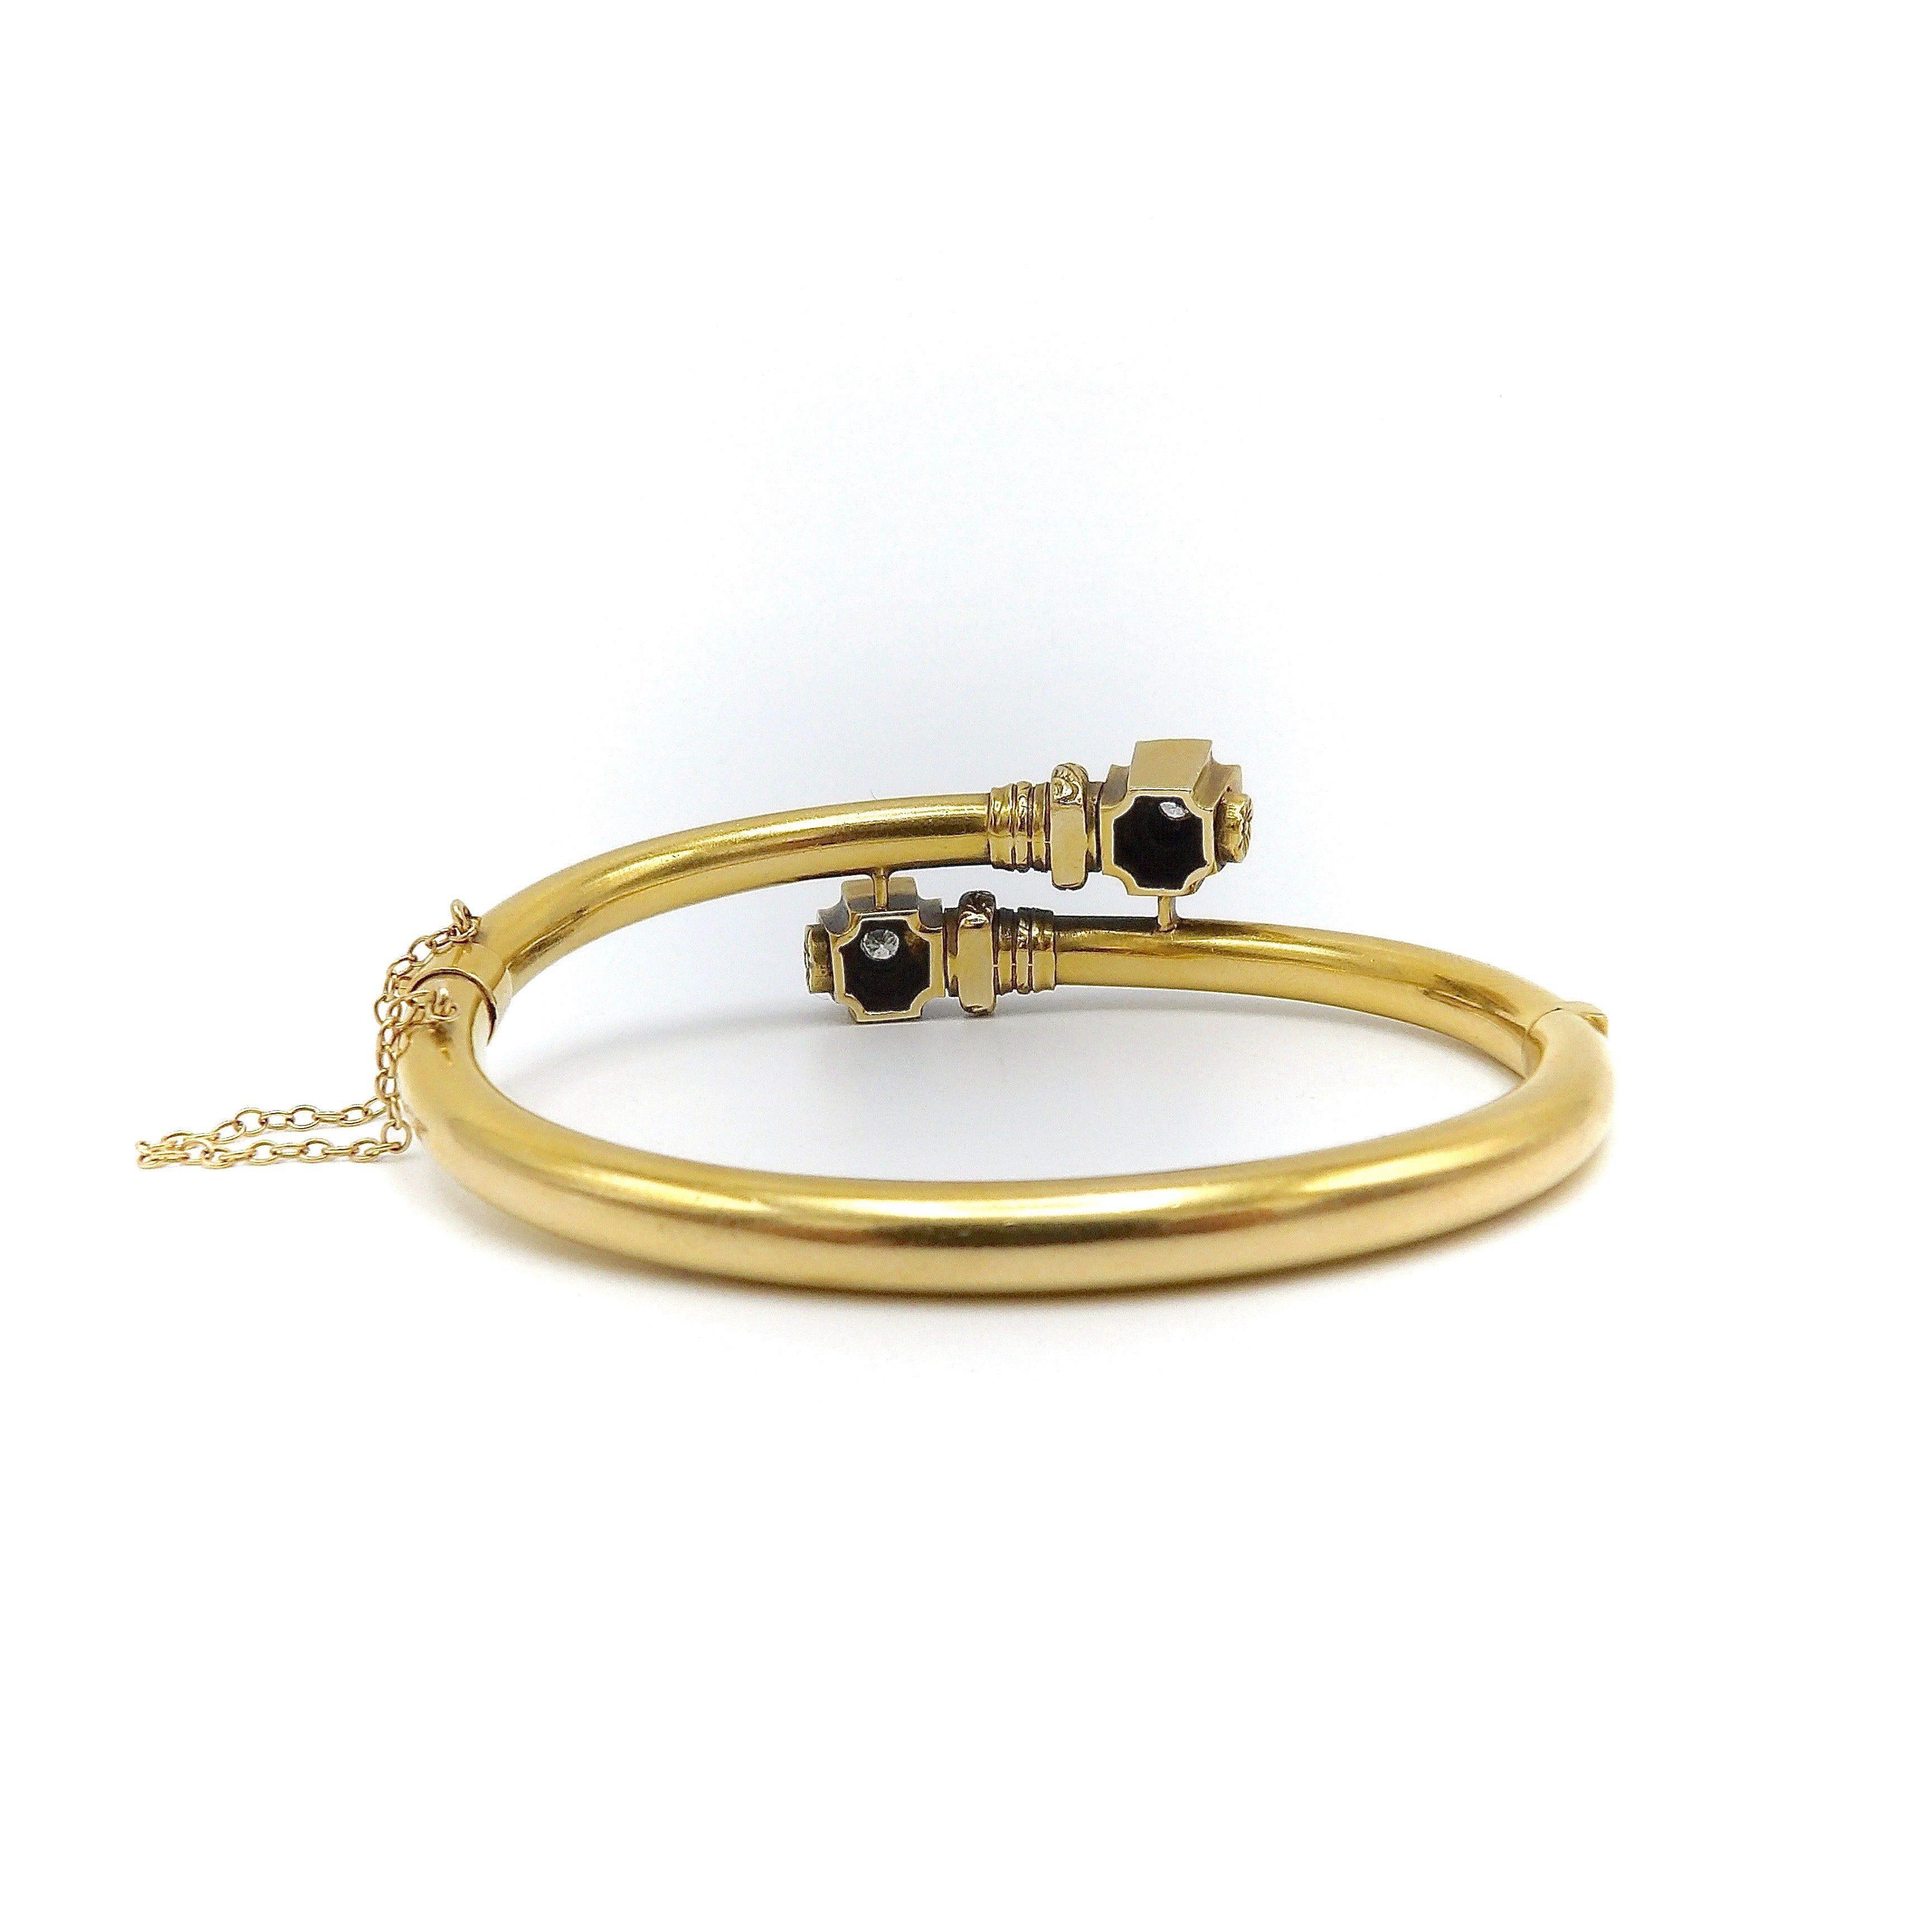 Etruscan Revival 14K Gold Bypass Bracelet with Diamonds For Sale 3